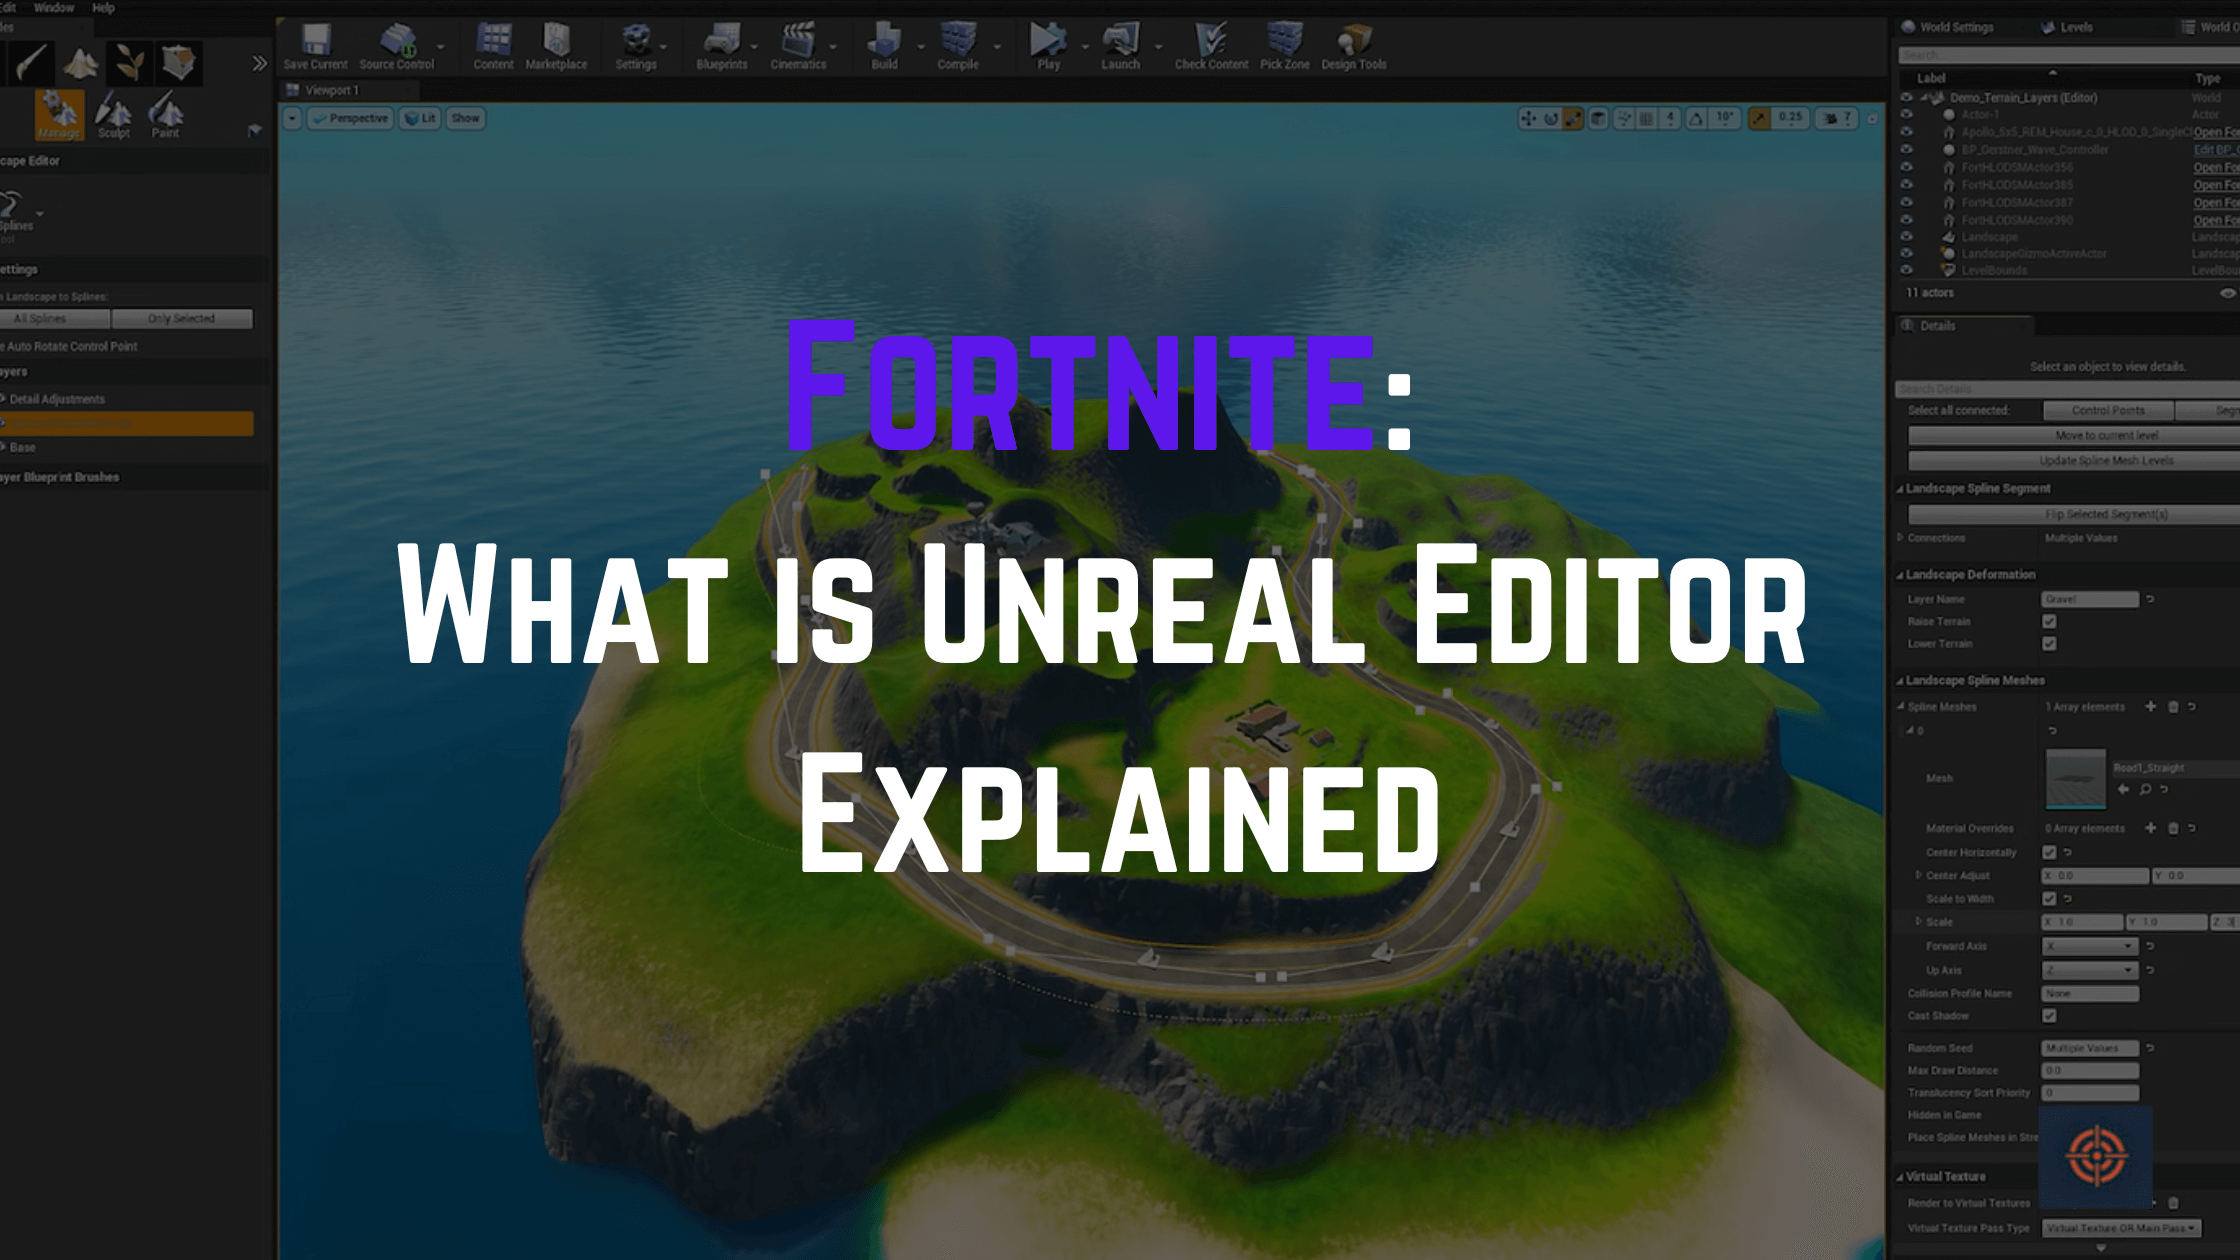 What is Unreal Editor For Fortnite